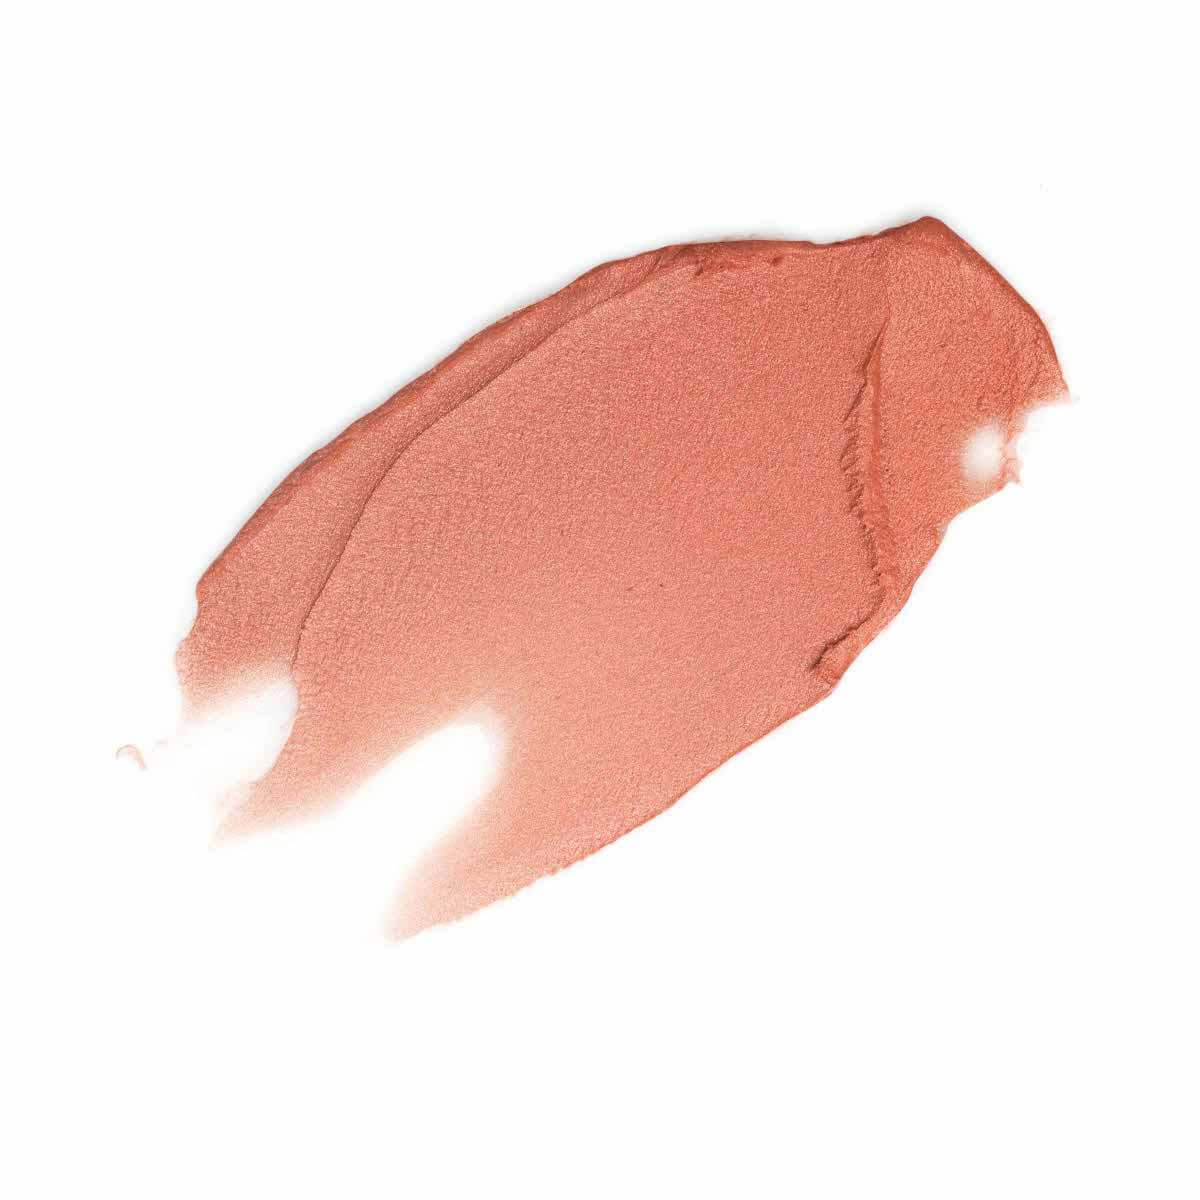 ModelCo Hailey Baldwin for ModelCo On-The-Glow Cream Highlighter 4.5g (Various Shades) - Rose Glow